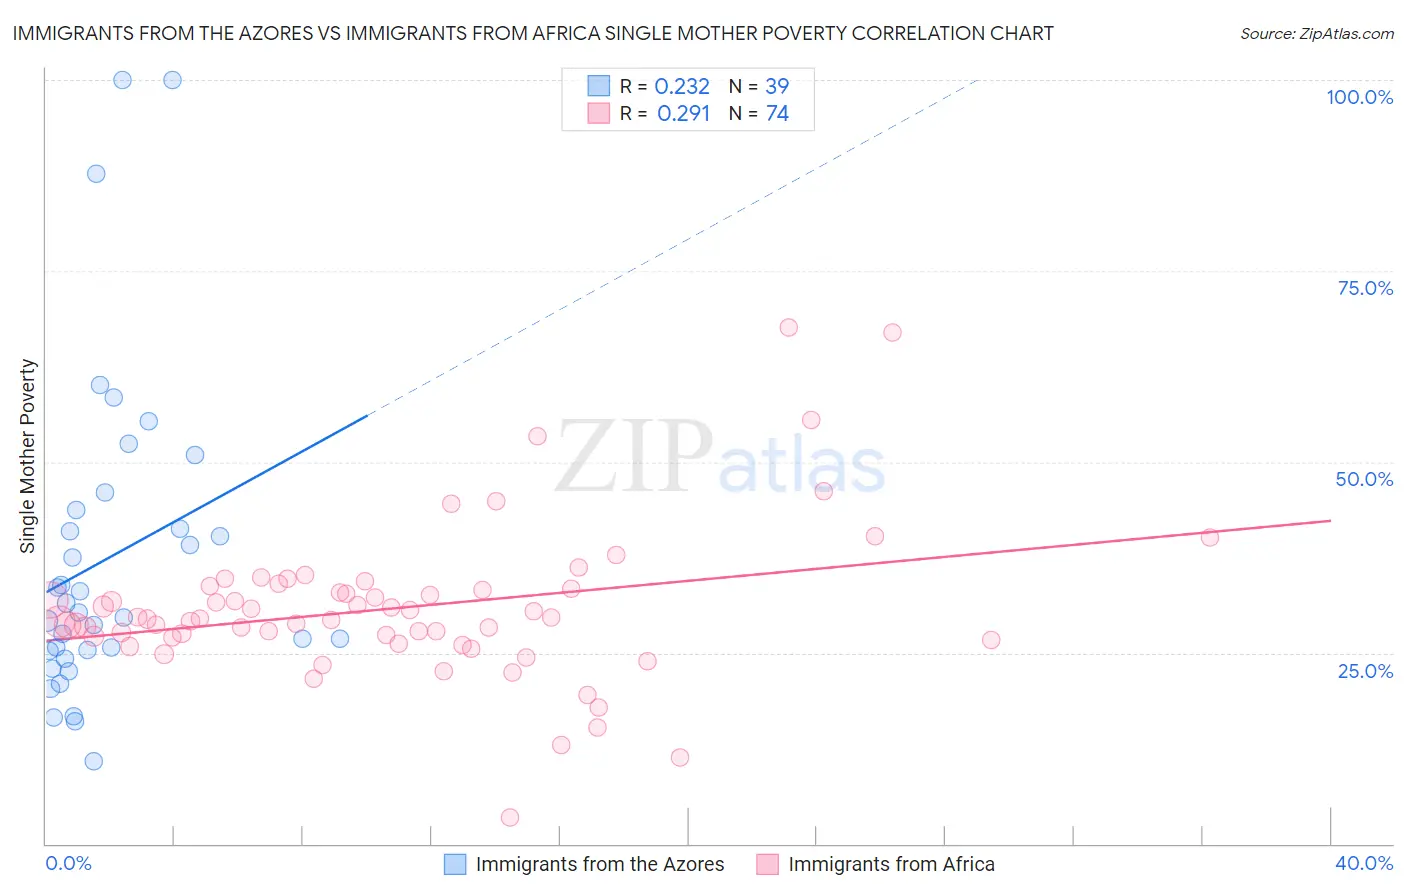 Immigrants from the Azores vs Immigrants from Africa Single Mother Poverty